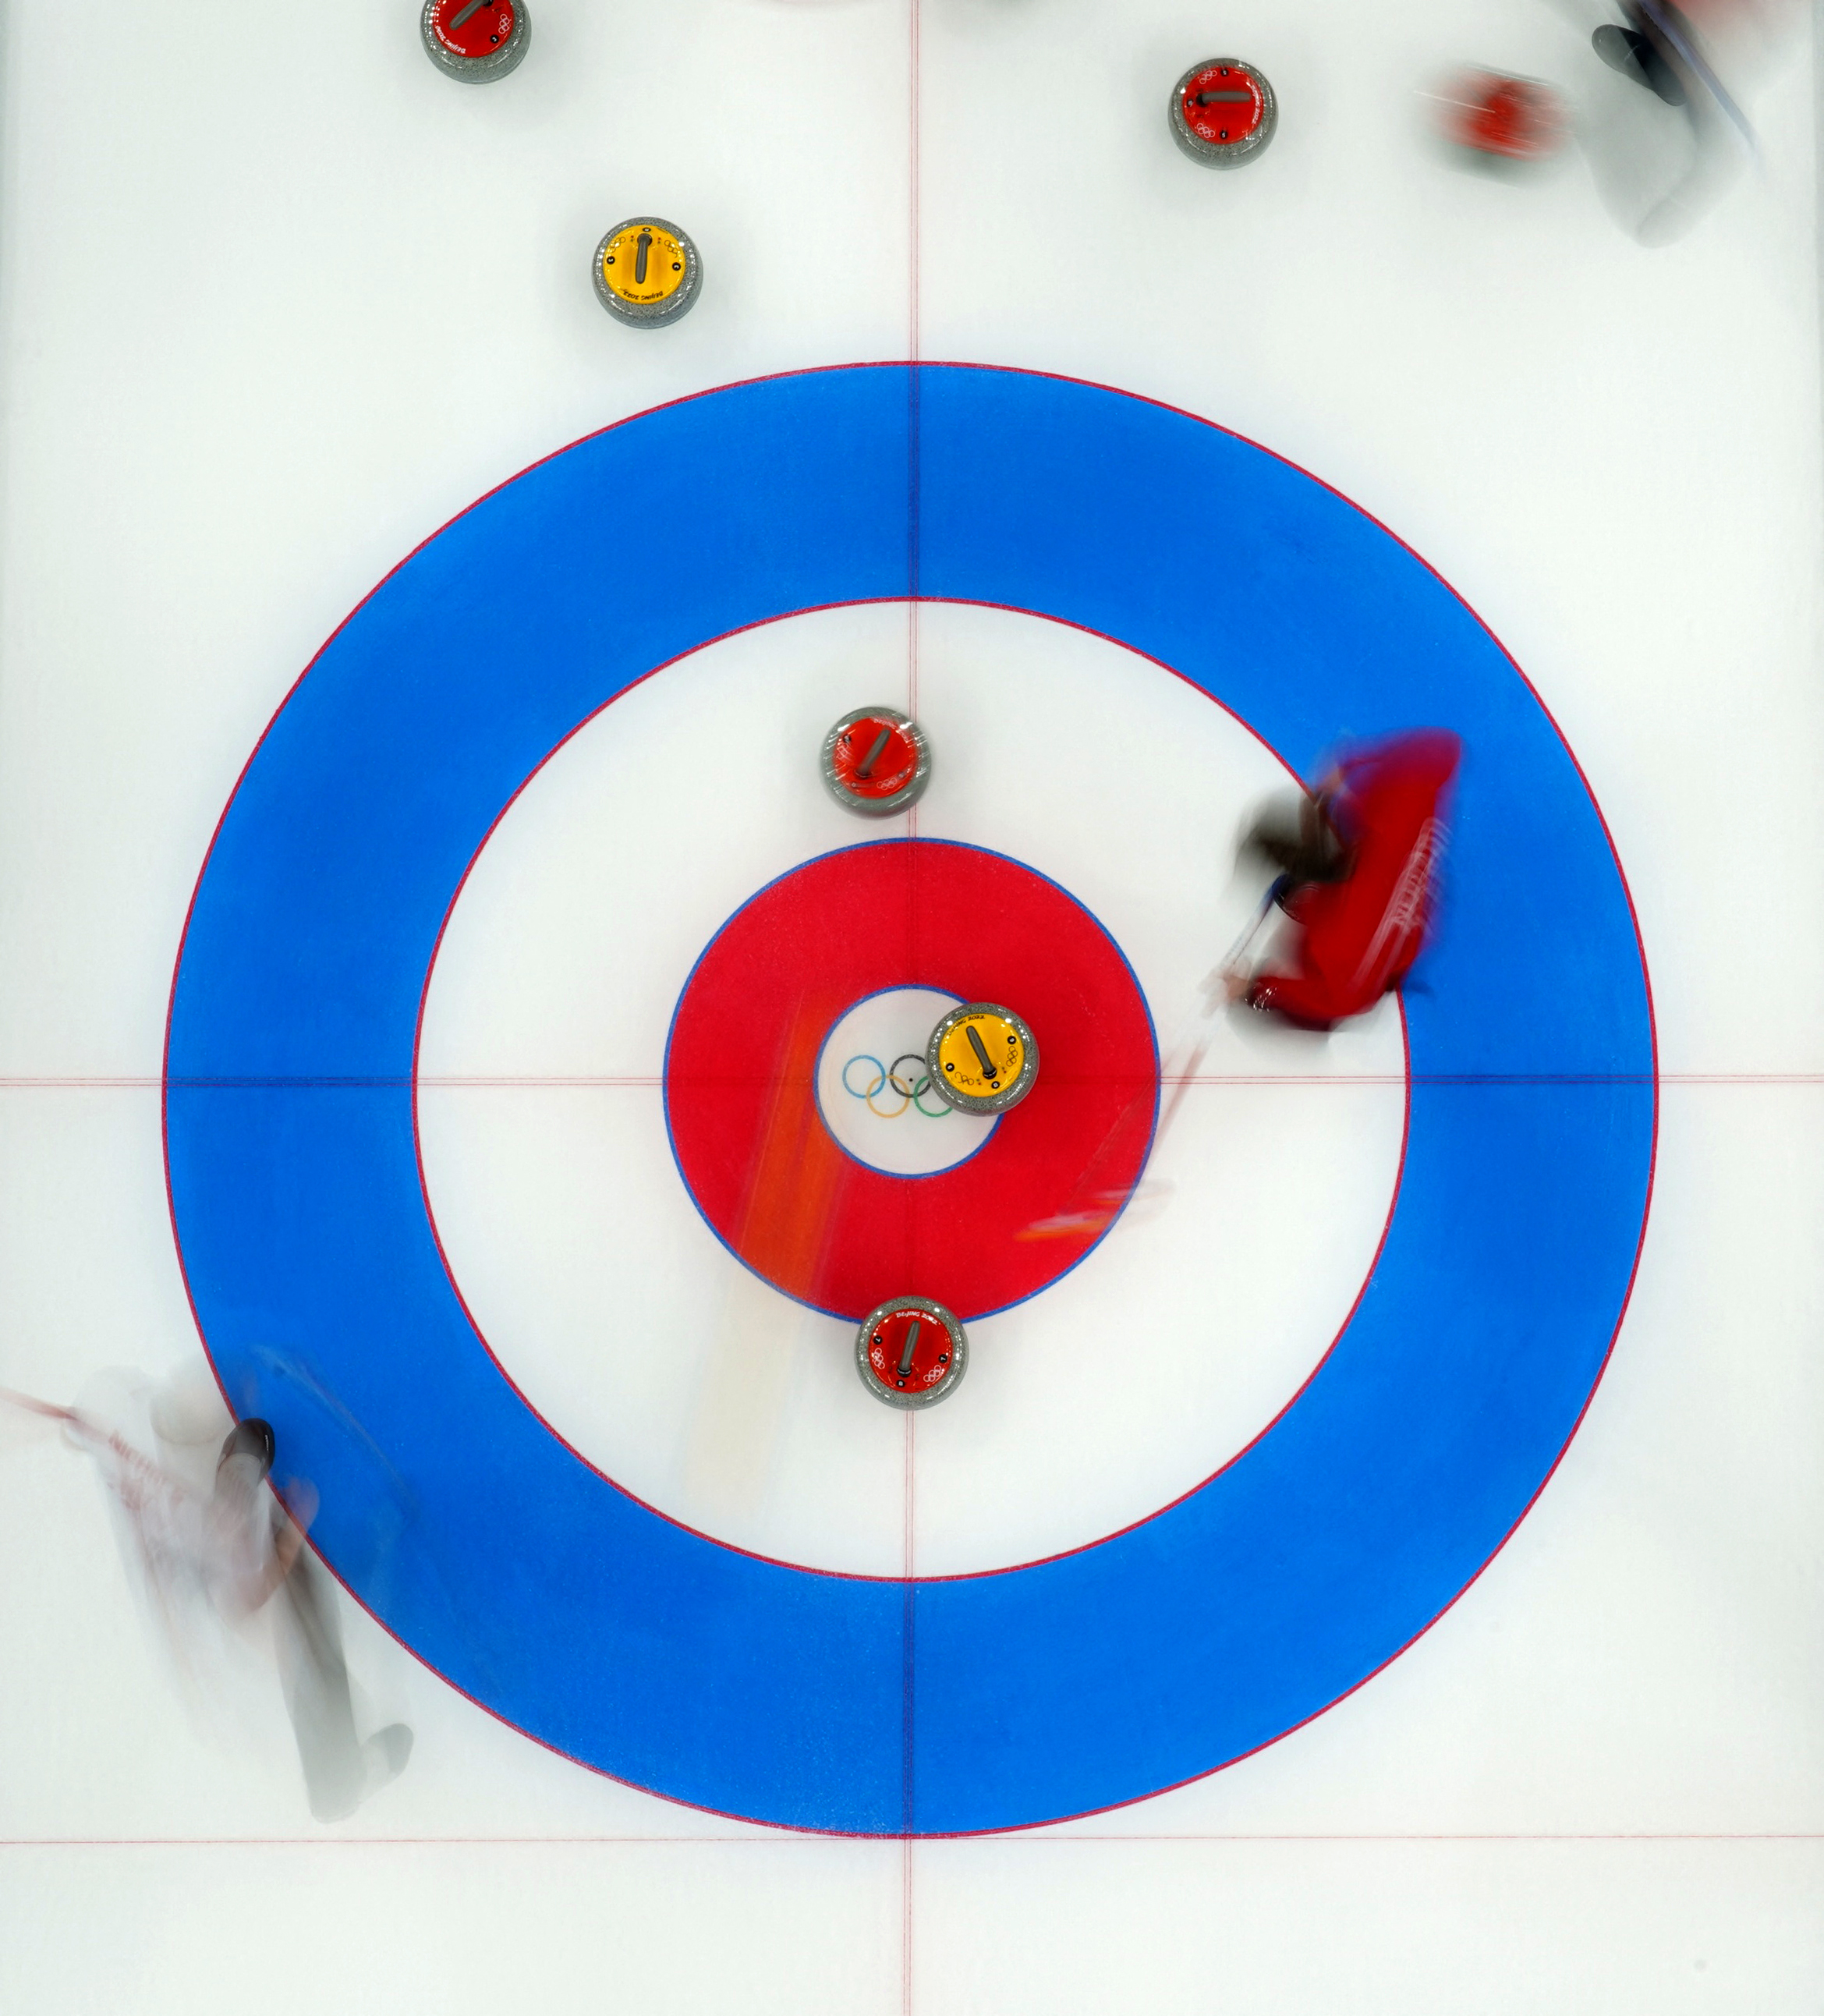 2022 Beijing Olympics - Curling - Men's Round Robin Session 2 - Norway v Canada - National Aquatics Center, Beijing, China - February 10, 2022. Athletes in action. REUTERS/Evelyn Hockstein